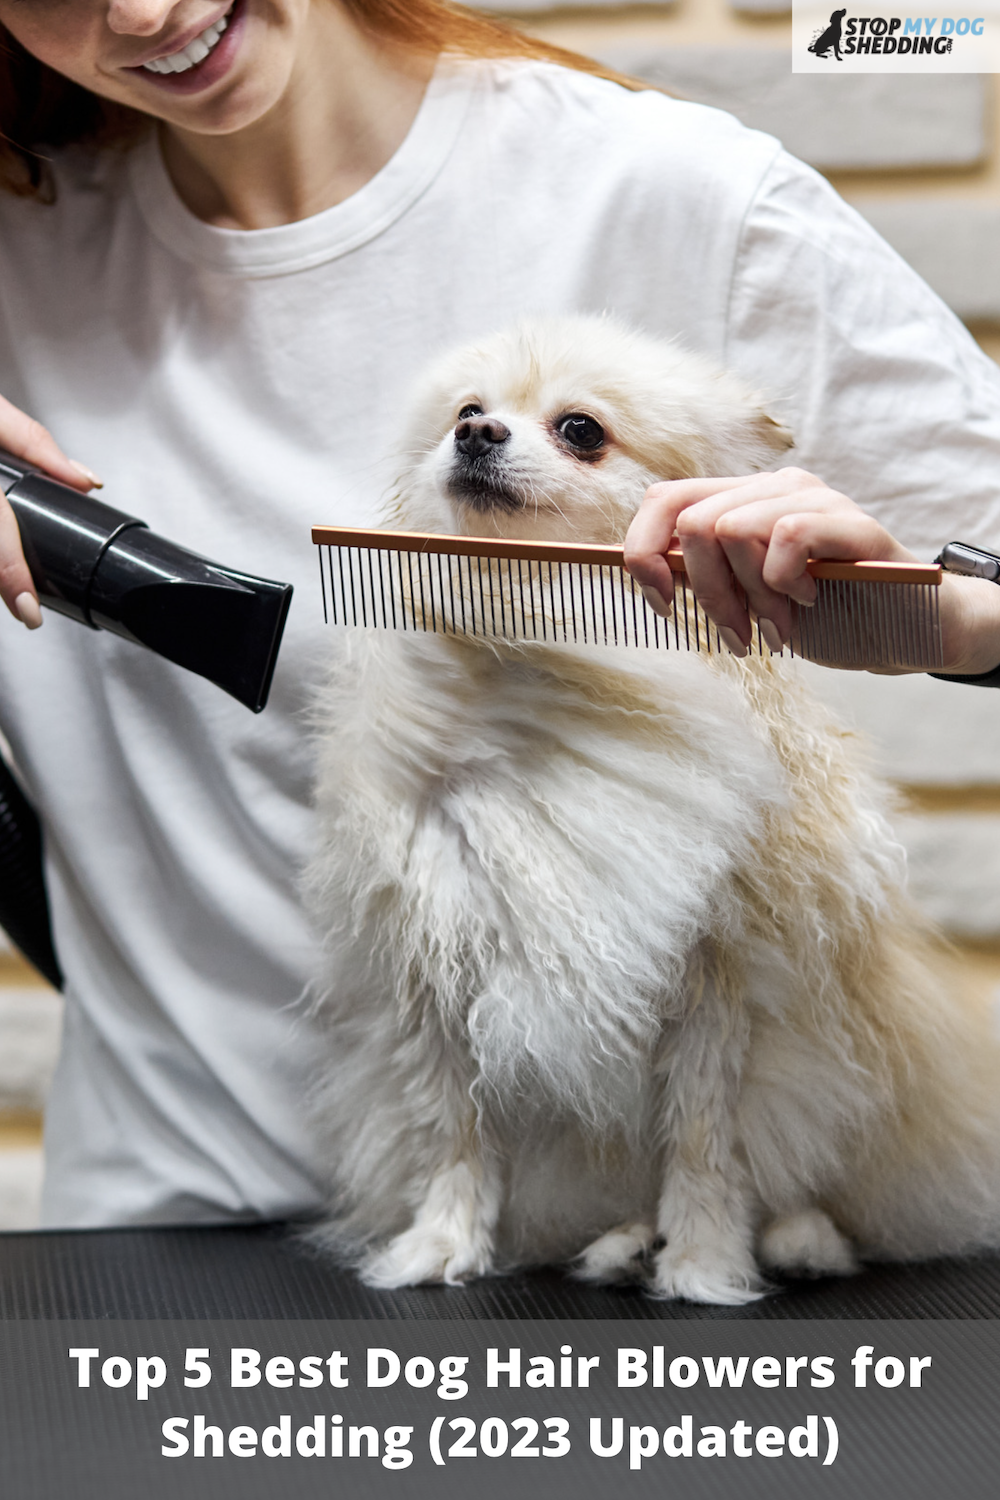 Top 5 Best Dog Hair Blowers for Shedding (2023 Reviews & Guide)